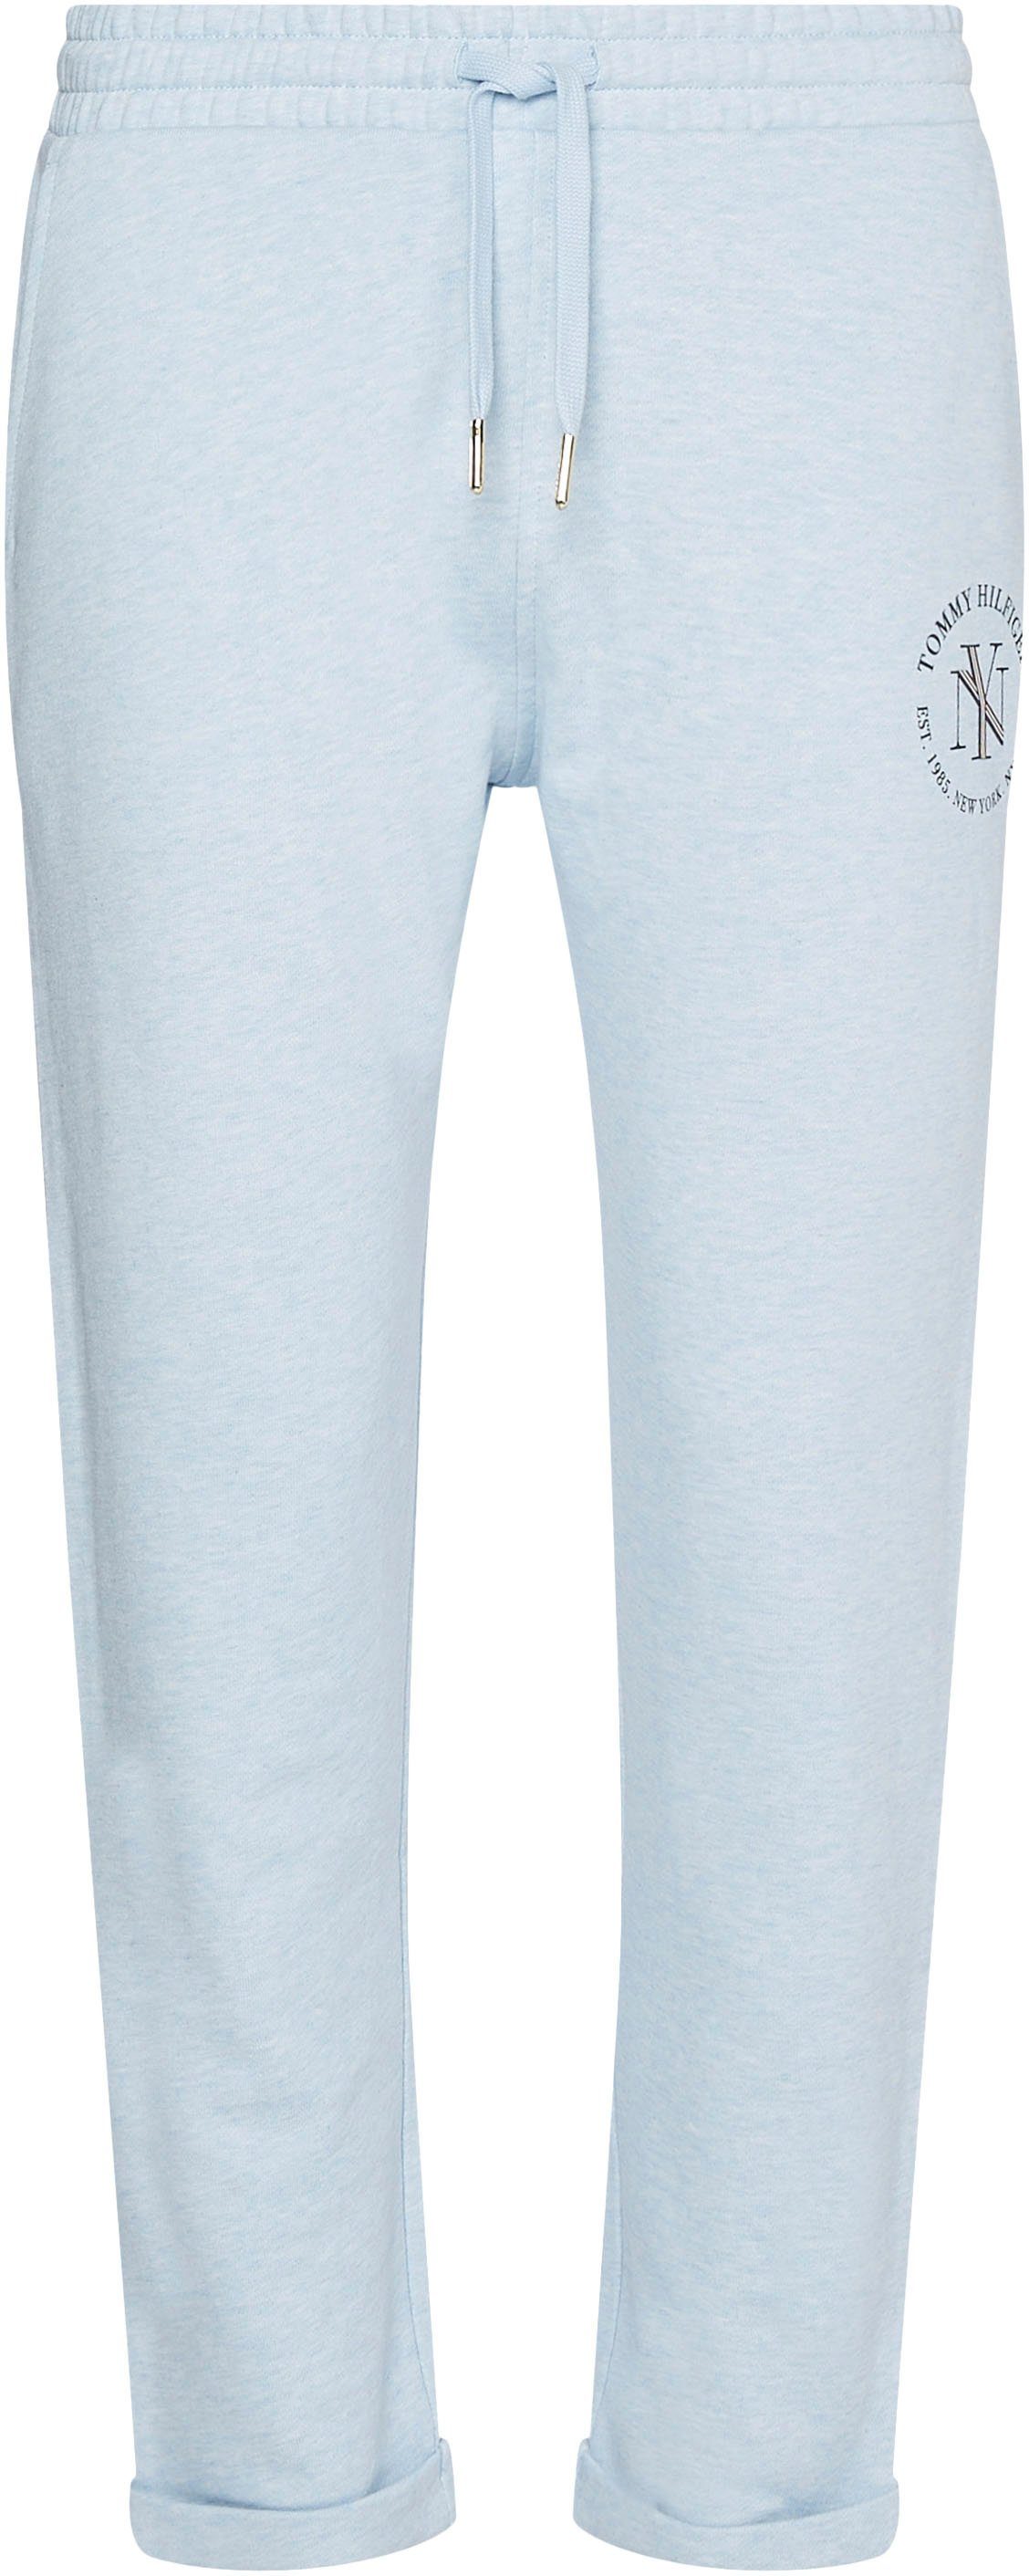 Tommy SWEATPANTS Hilfiger Hilfiger TAPERED Markenlabel Tommy Sweatpants mit ROUNDALL Breezy-Blue-Heather NYC